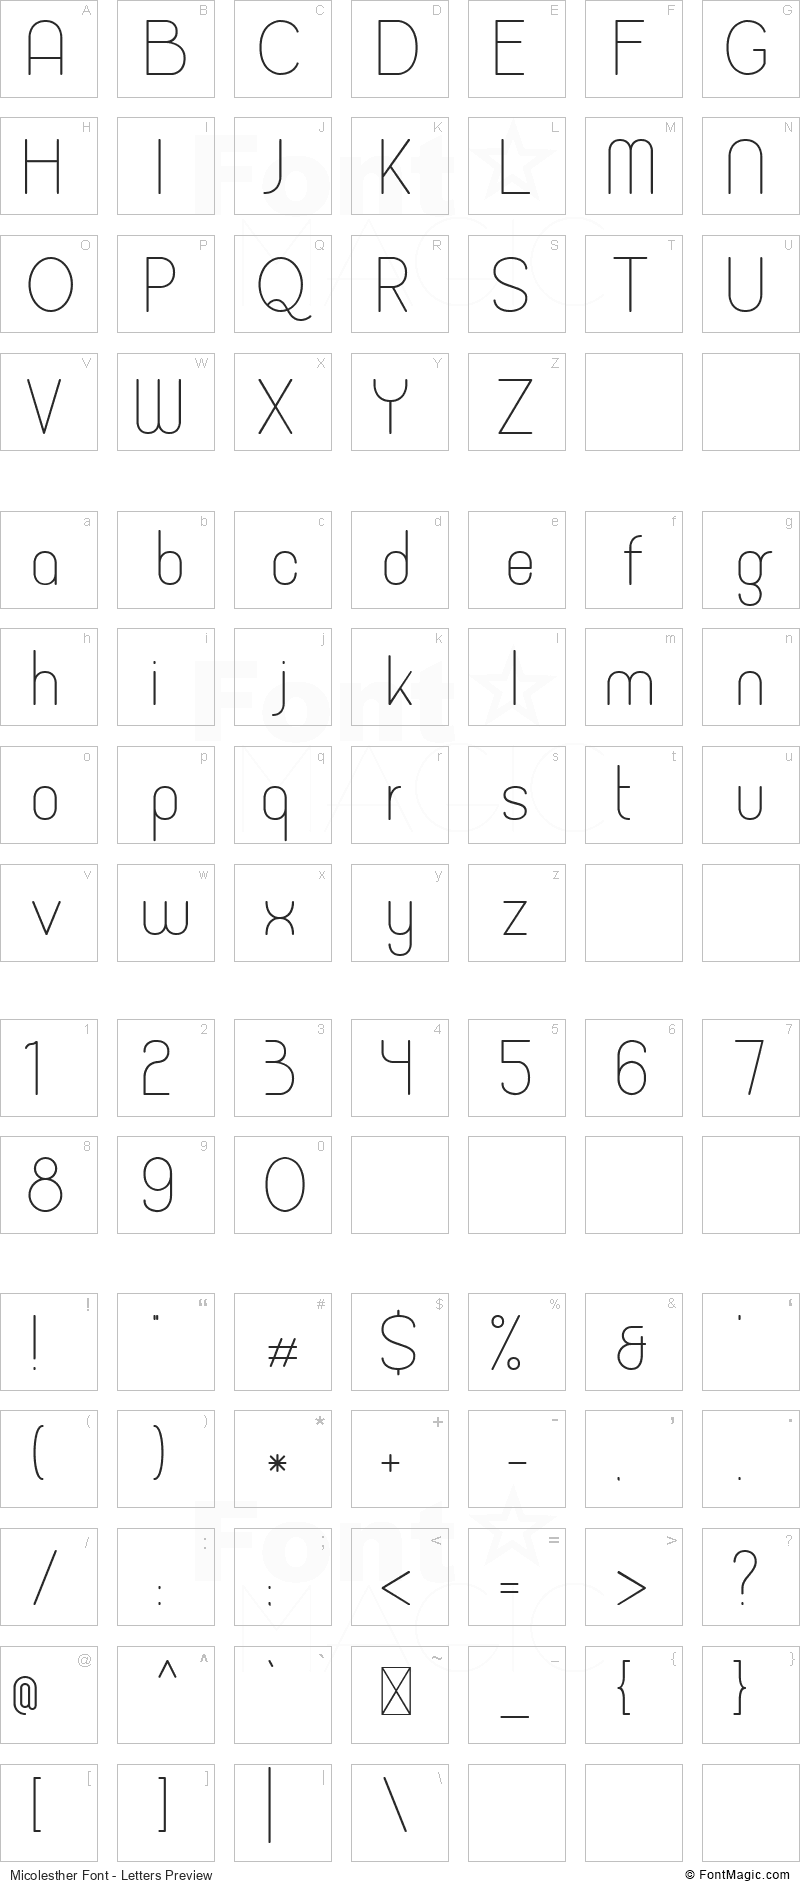 Micolesther Font - All Latters Preview Chart